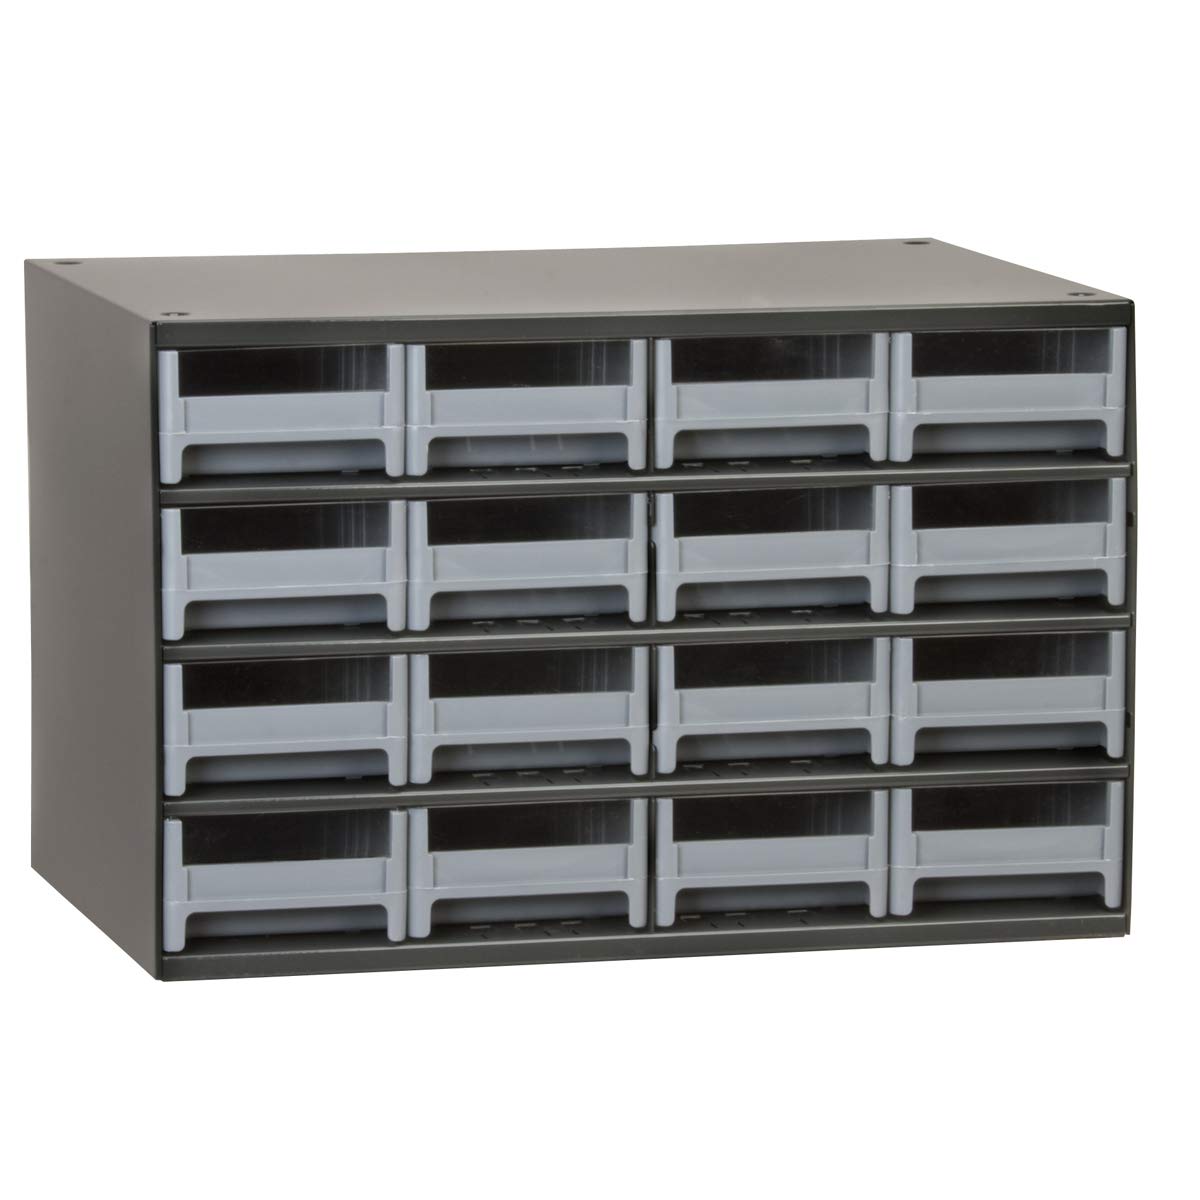 Akro-Mils 19416 Steel Parts Garage Storage Cabinet Organizer for Small Hardware, Nails, Screws, Bolts, Nuts, and More, 17-Inch W x 11-Inch D x 11-Inch H, 16-Drawer, Gray Cabinet/Gray Drawers